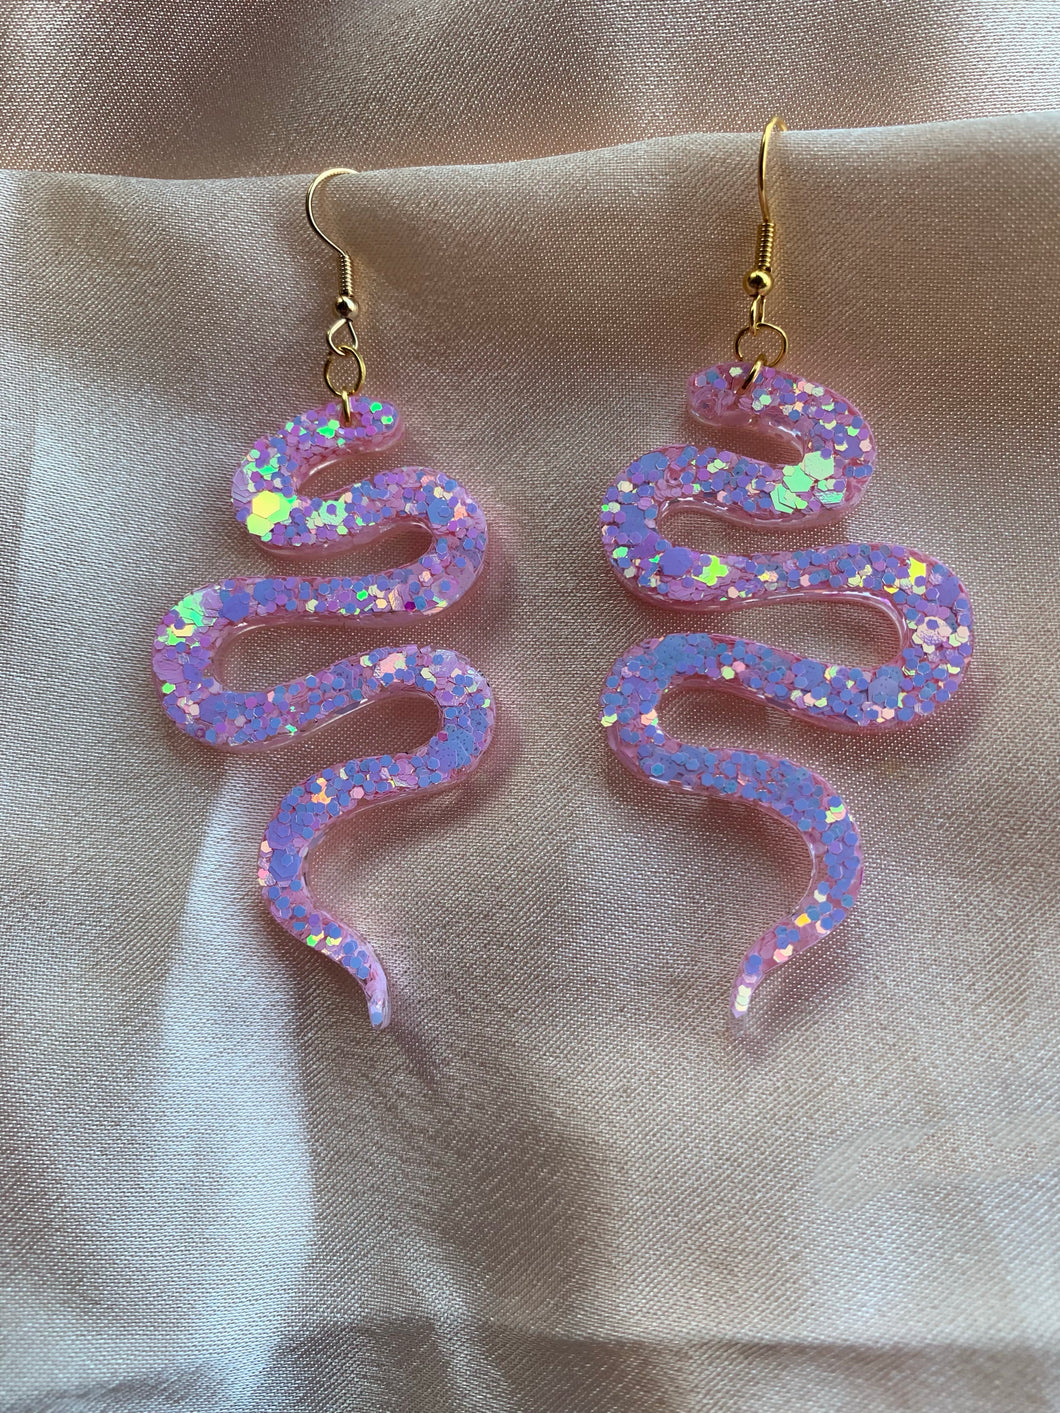 Cotton candy snake earrings